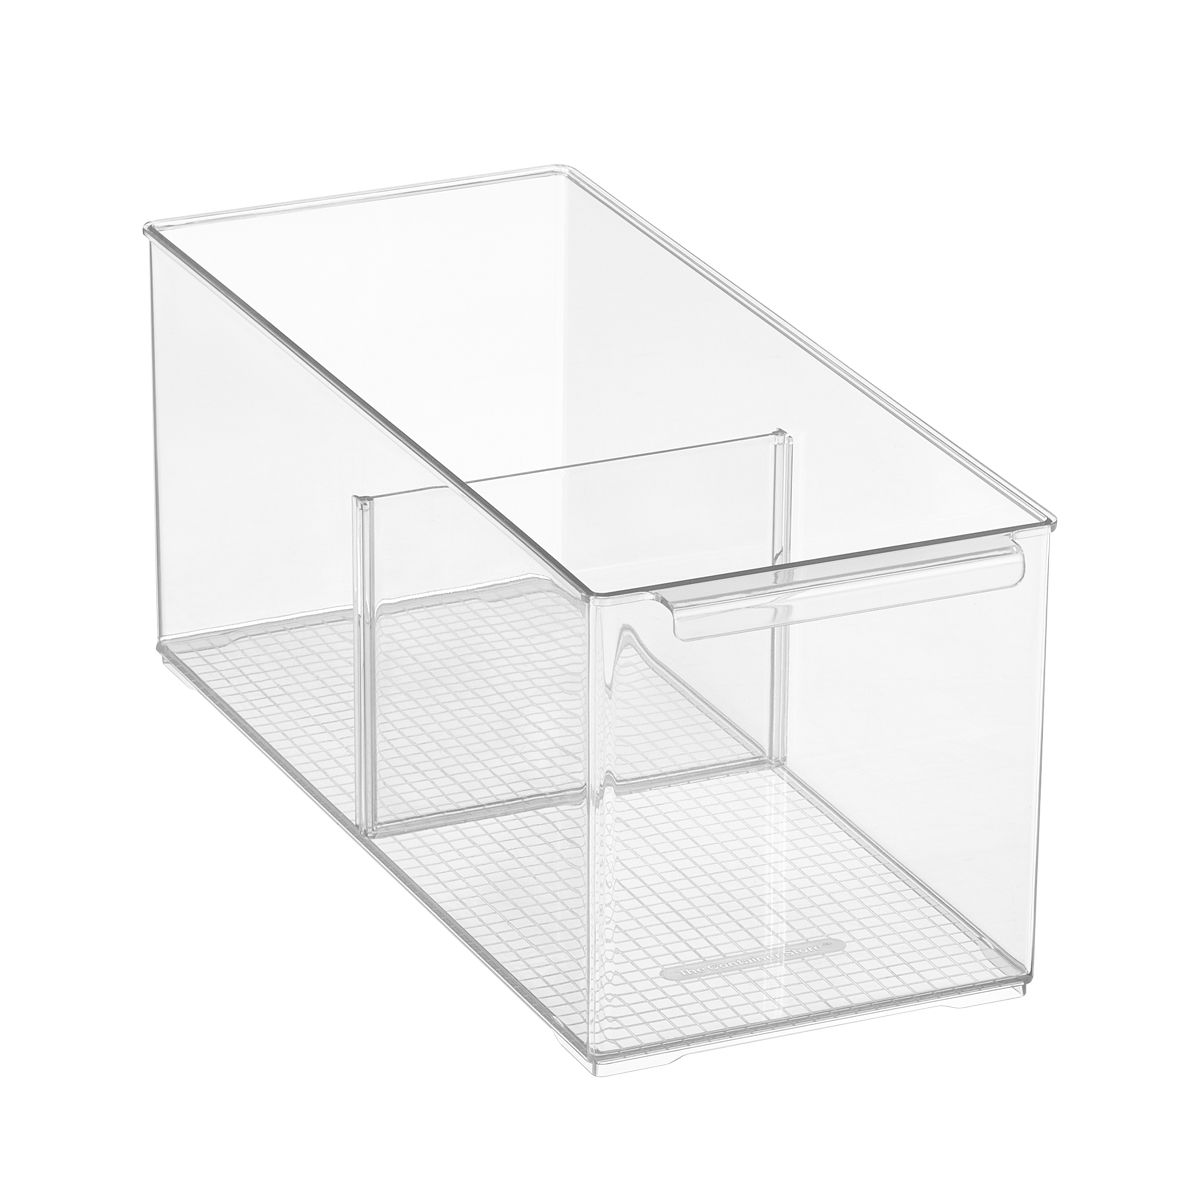 Everything Organizer Shelf-Depth Pantry Bin with Divider | The Container Store